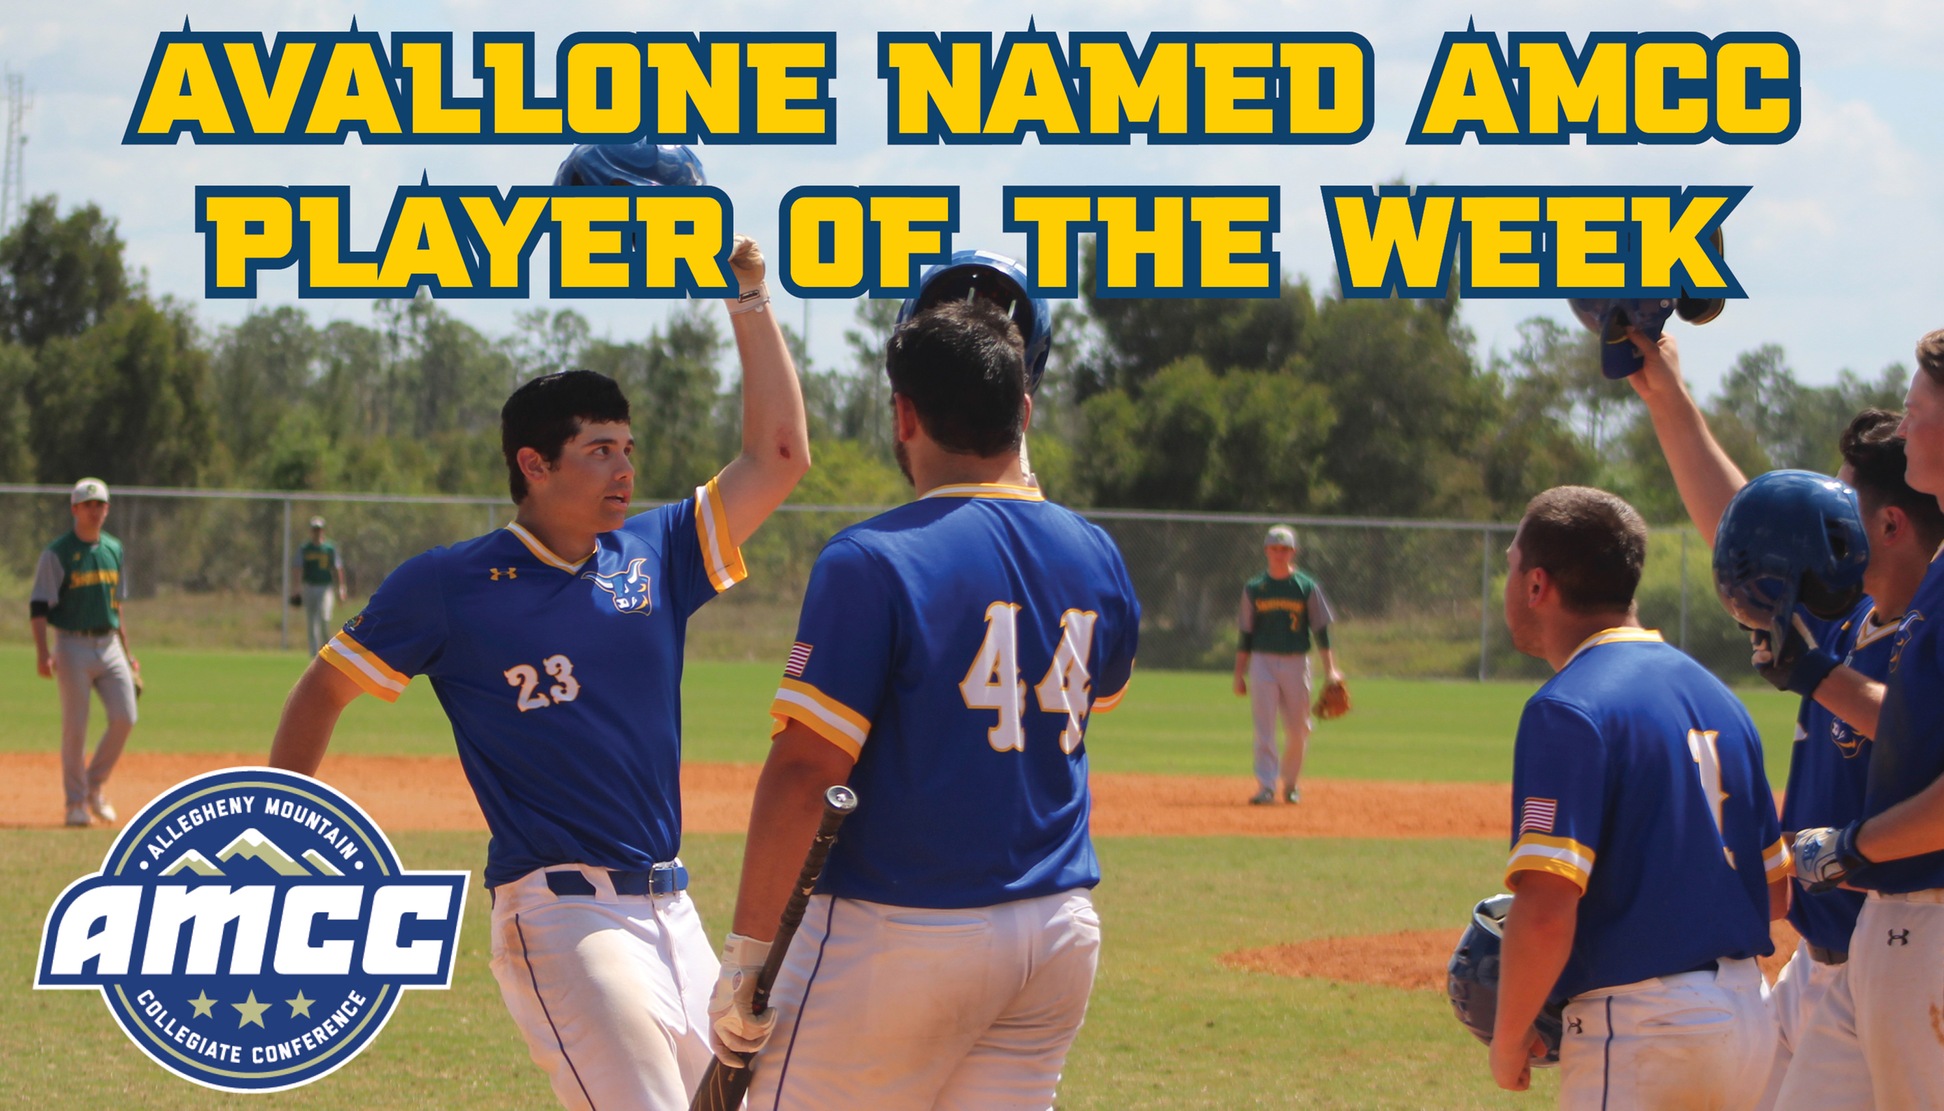 Matteo Avallone named the AMCC Player of the Week